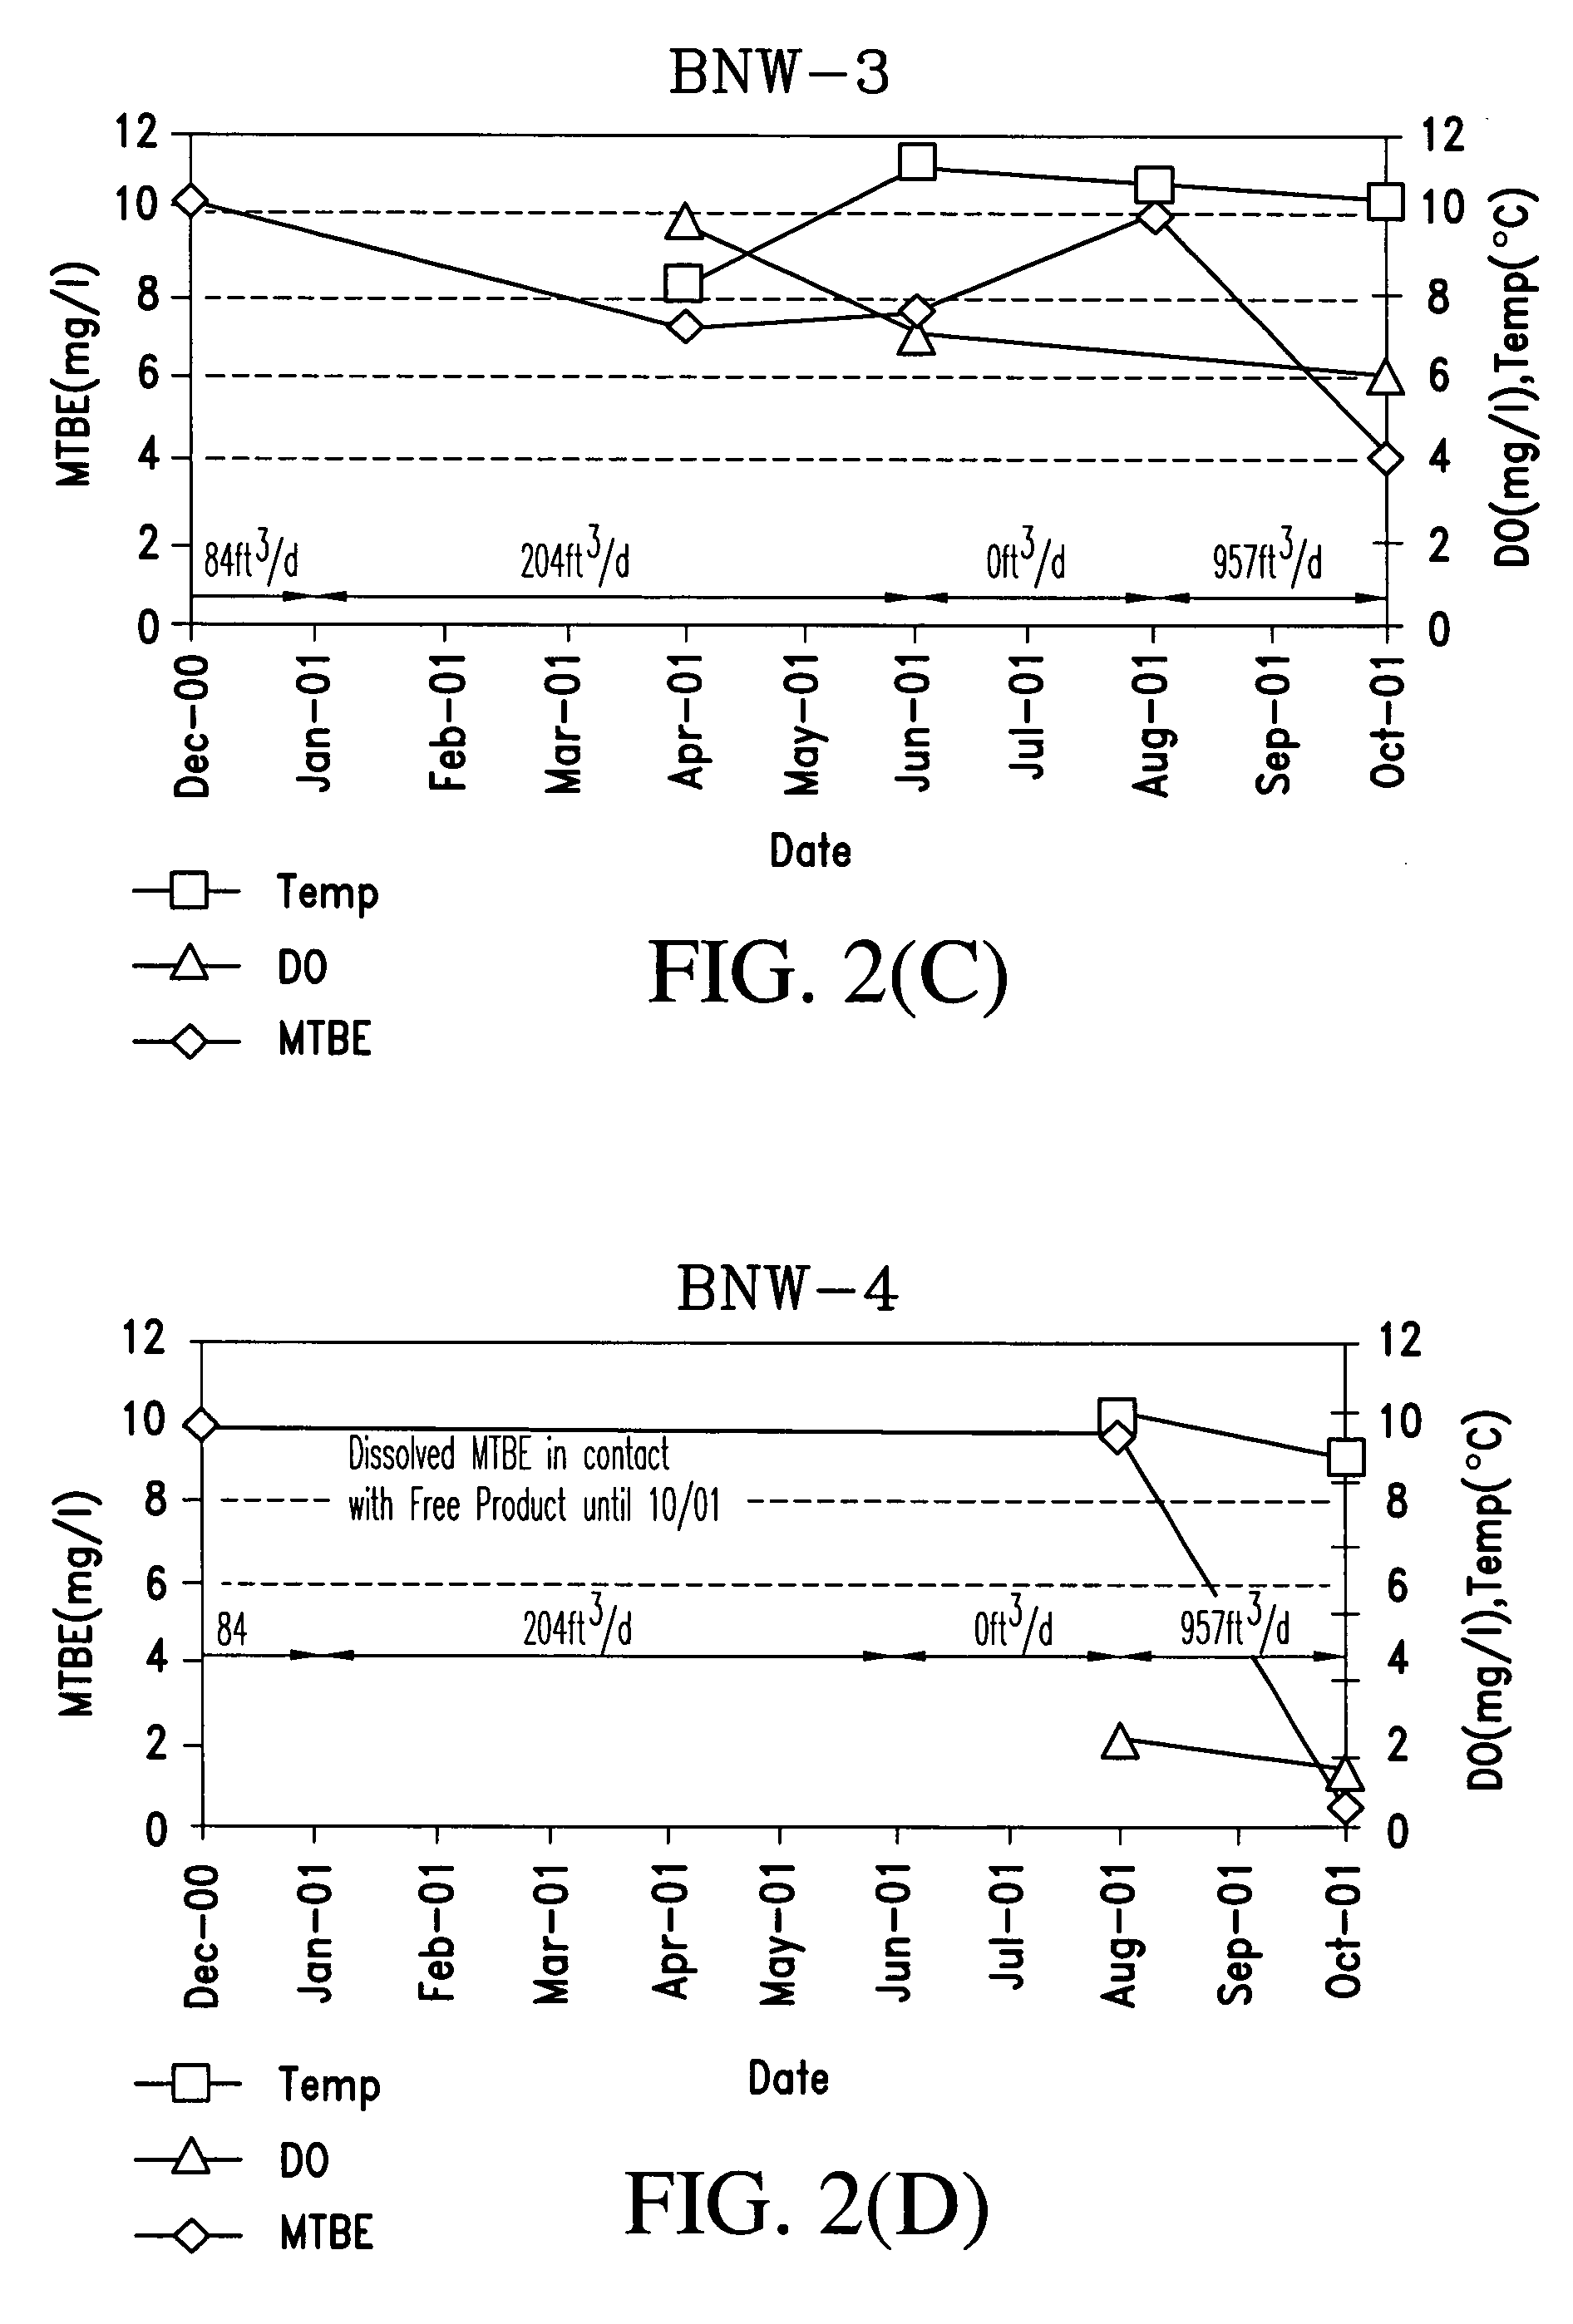 Process for the biodegradation of hydrocarbons and ethers in subsurface soil by introduction of a solid oxygen source by hydraulic fracturing